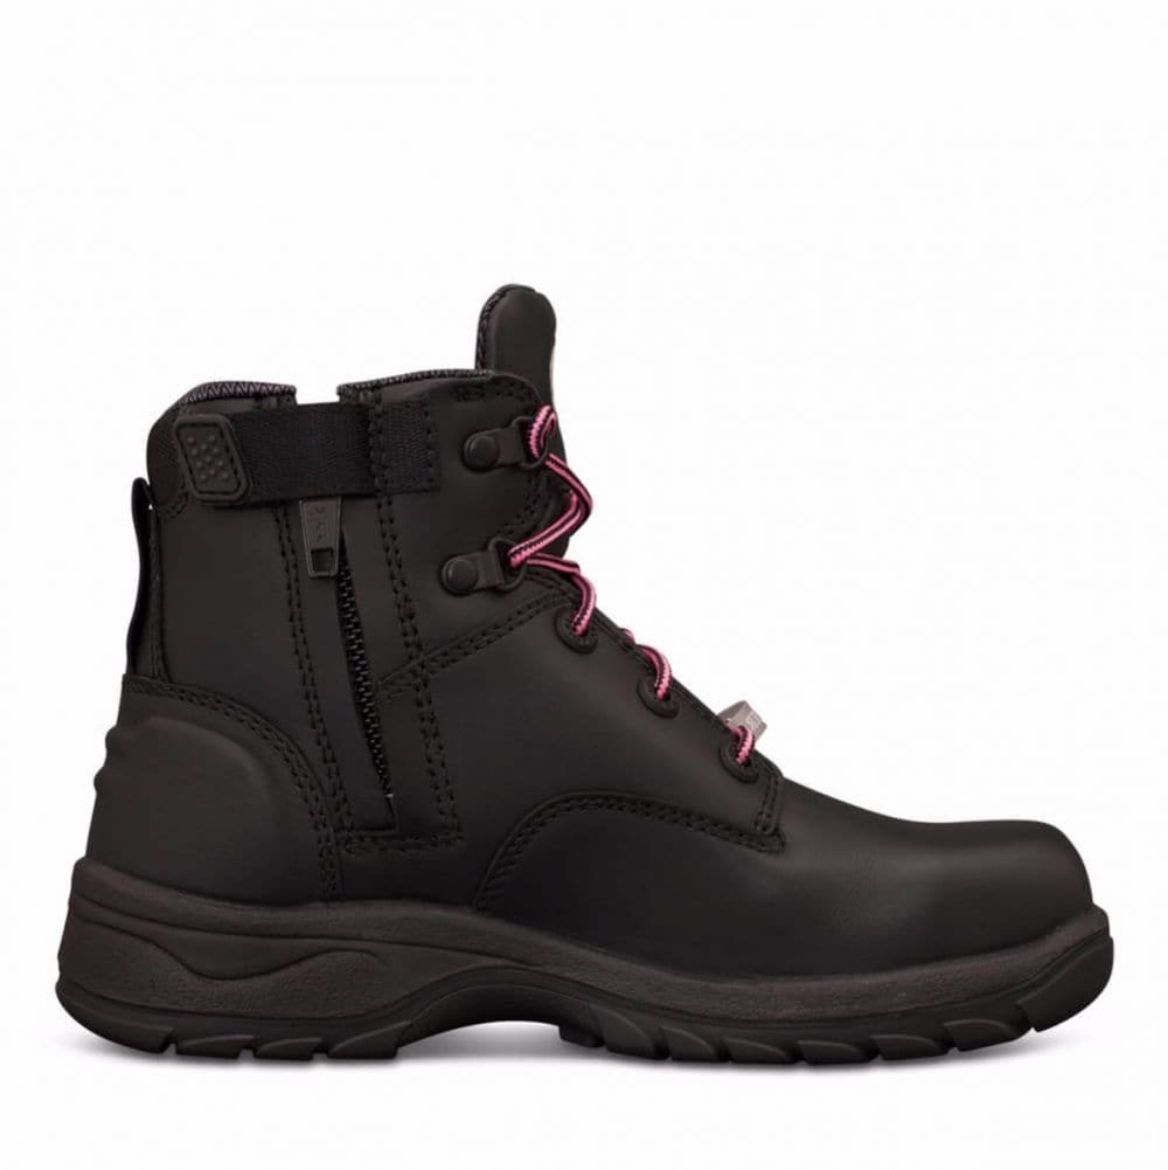 Picture of ANKLE HEIGHT ZIP SIDE LACE UP BOOT, WATER RESISTANT FULL GRAIN LEATHER,
PADDED COLLAR, COOLSTEP LINING.